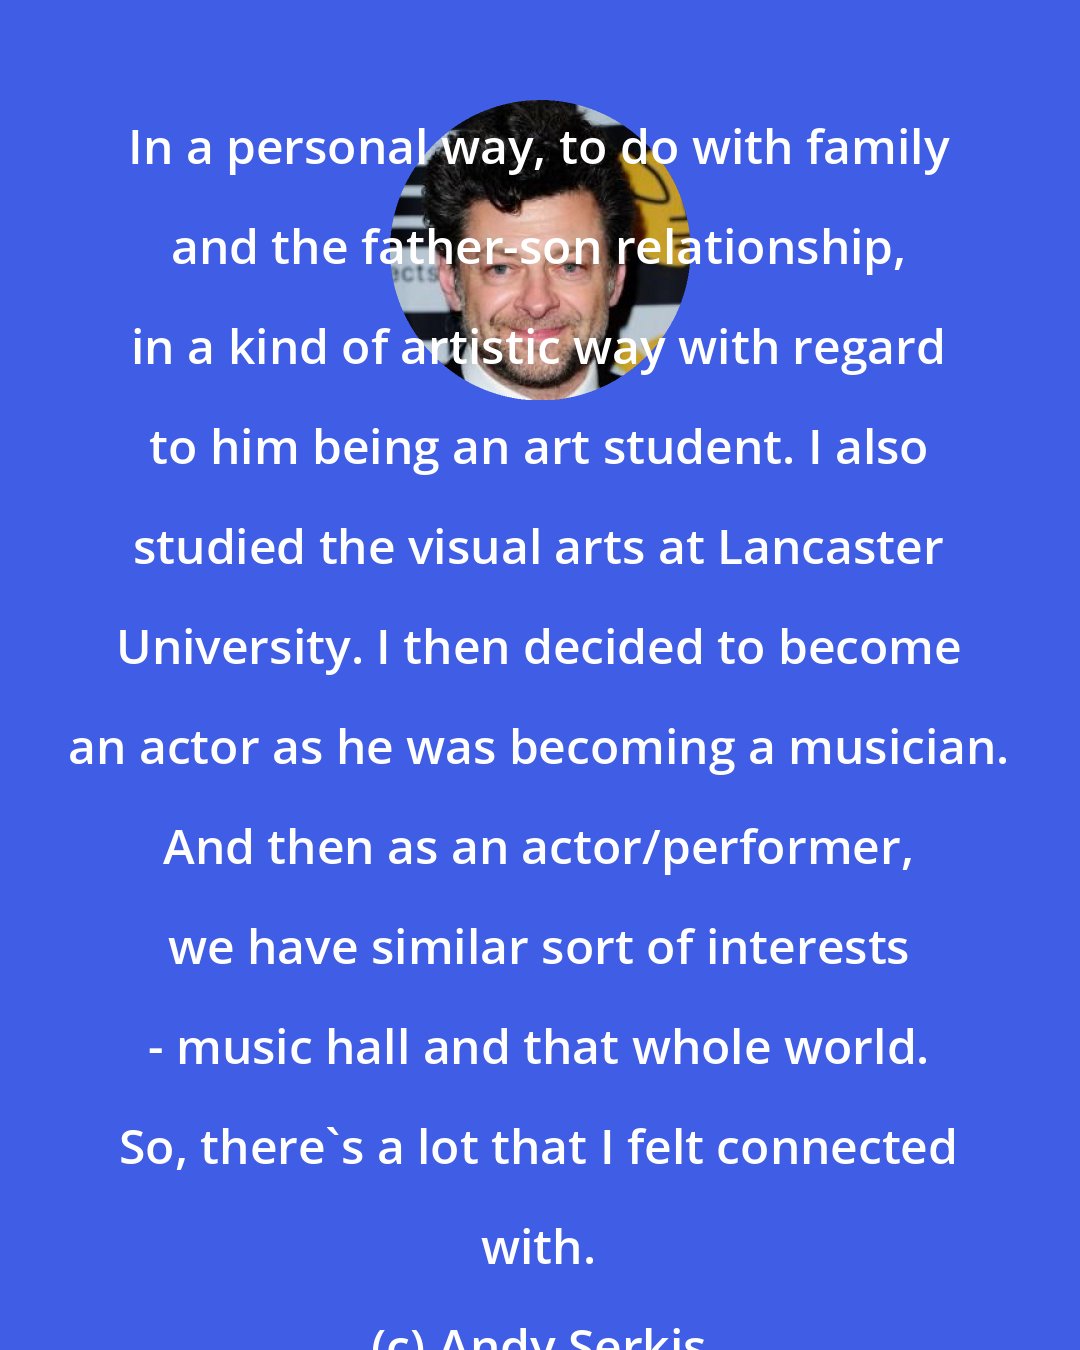 Andy Serkis: In a personal way, to do with family and the father-son relationship, in a kind of artistic way with regard to him being an art student. I also studied the visual arts at Lancaster University. I then decided to become an actor as he was becoming a musician. And then as an actor/performer, we have similar sort of interests - music hall and that whole world. So, there's a lot that I felt connected with.